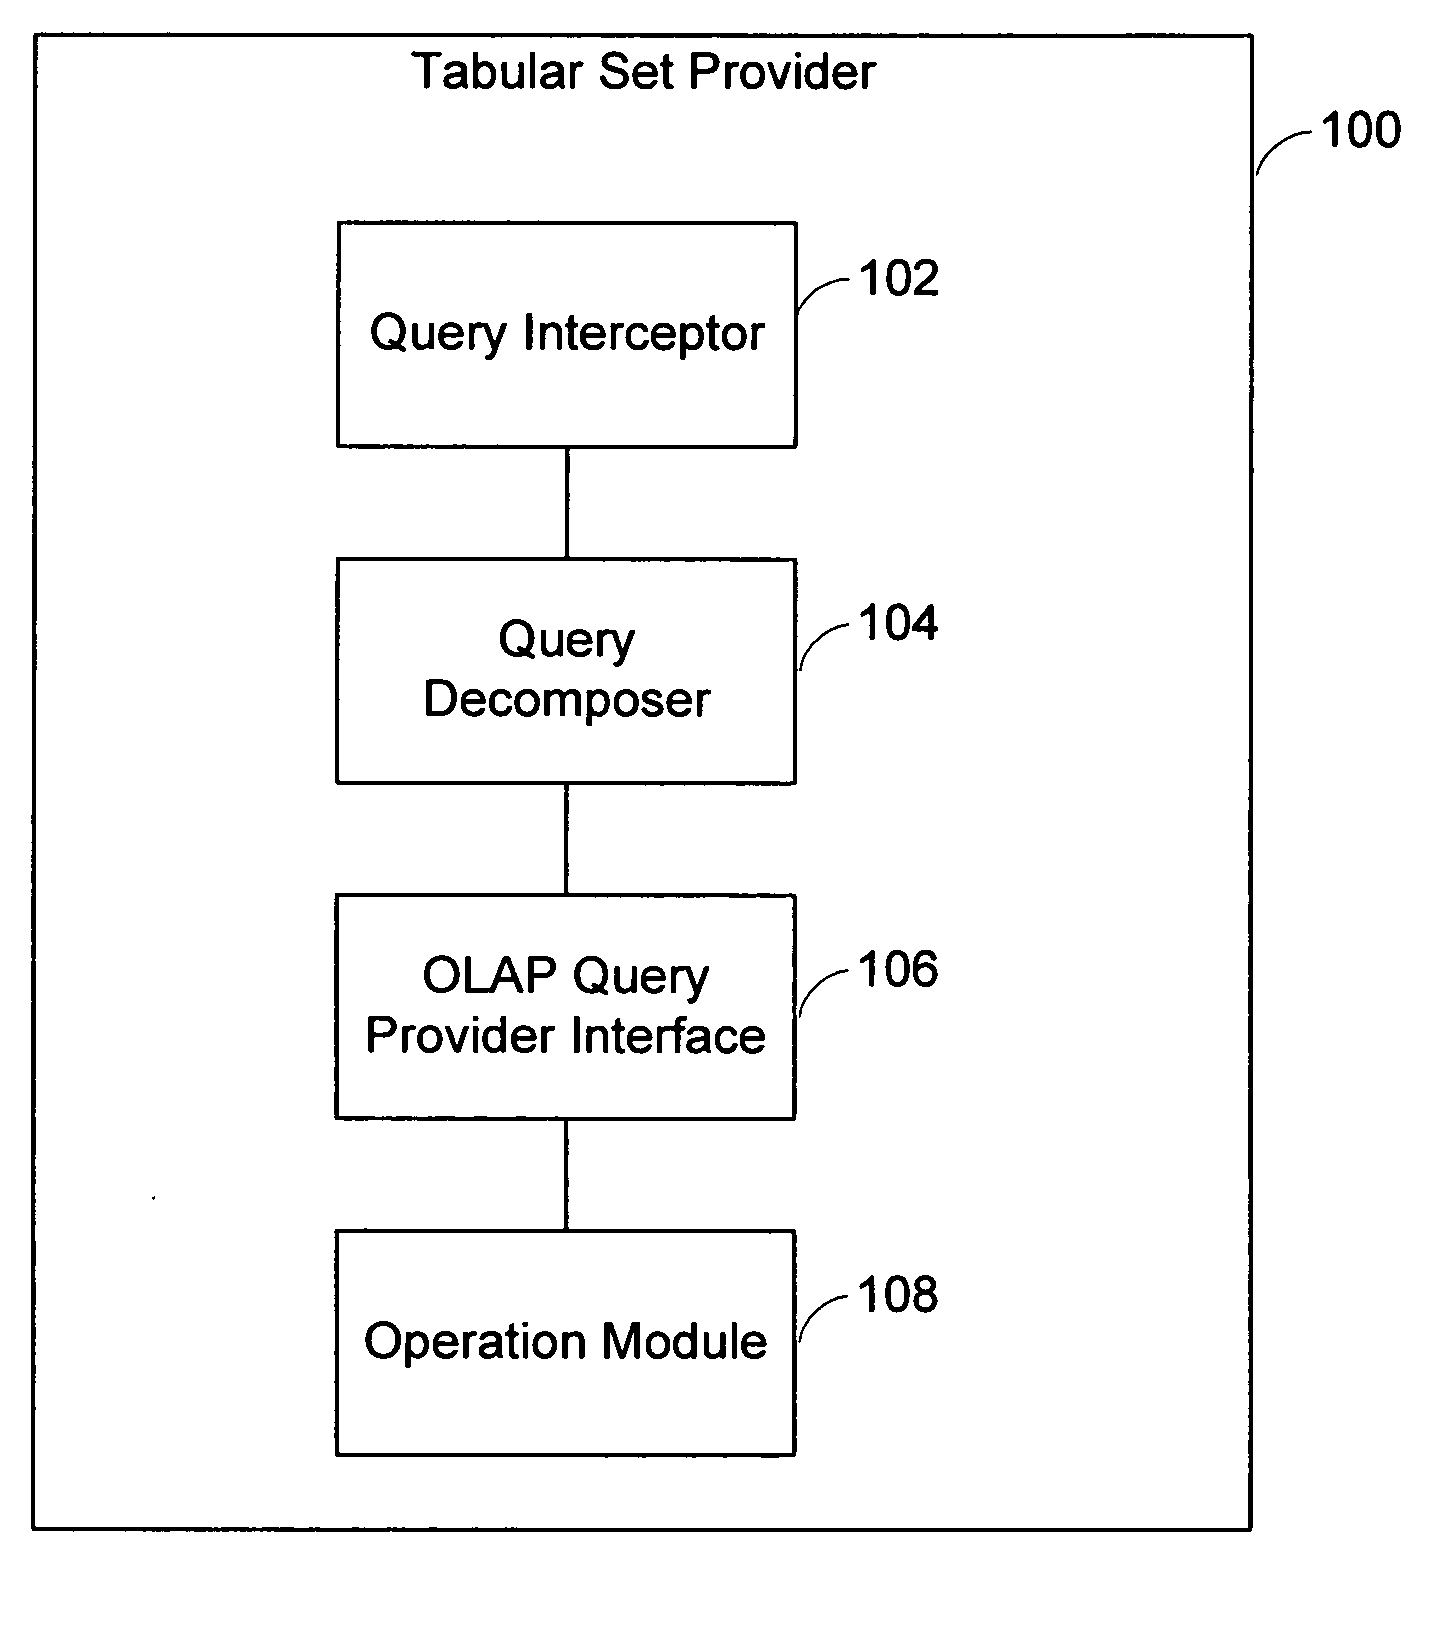 System and method of providing relational set operations for OLAP data sources